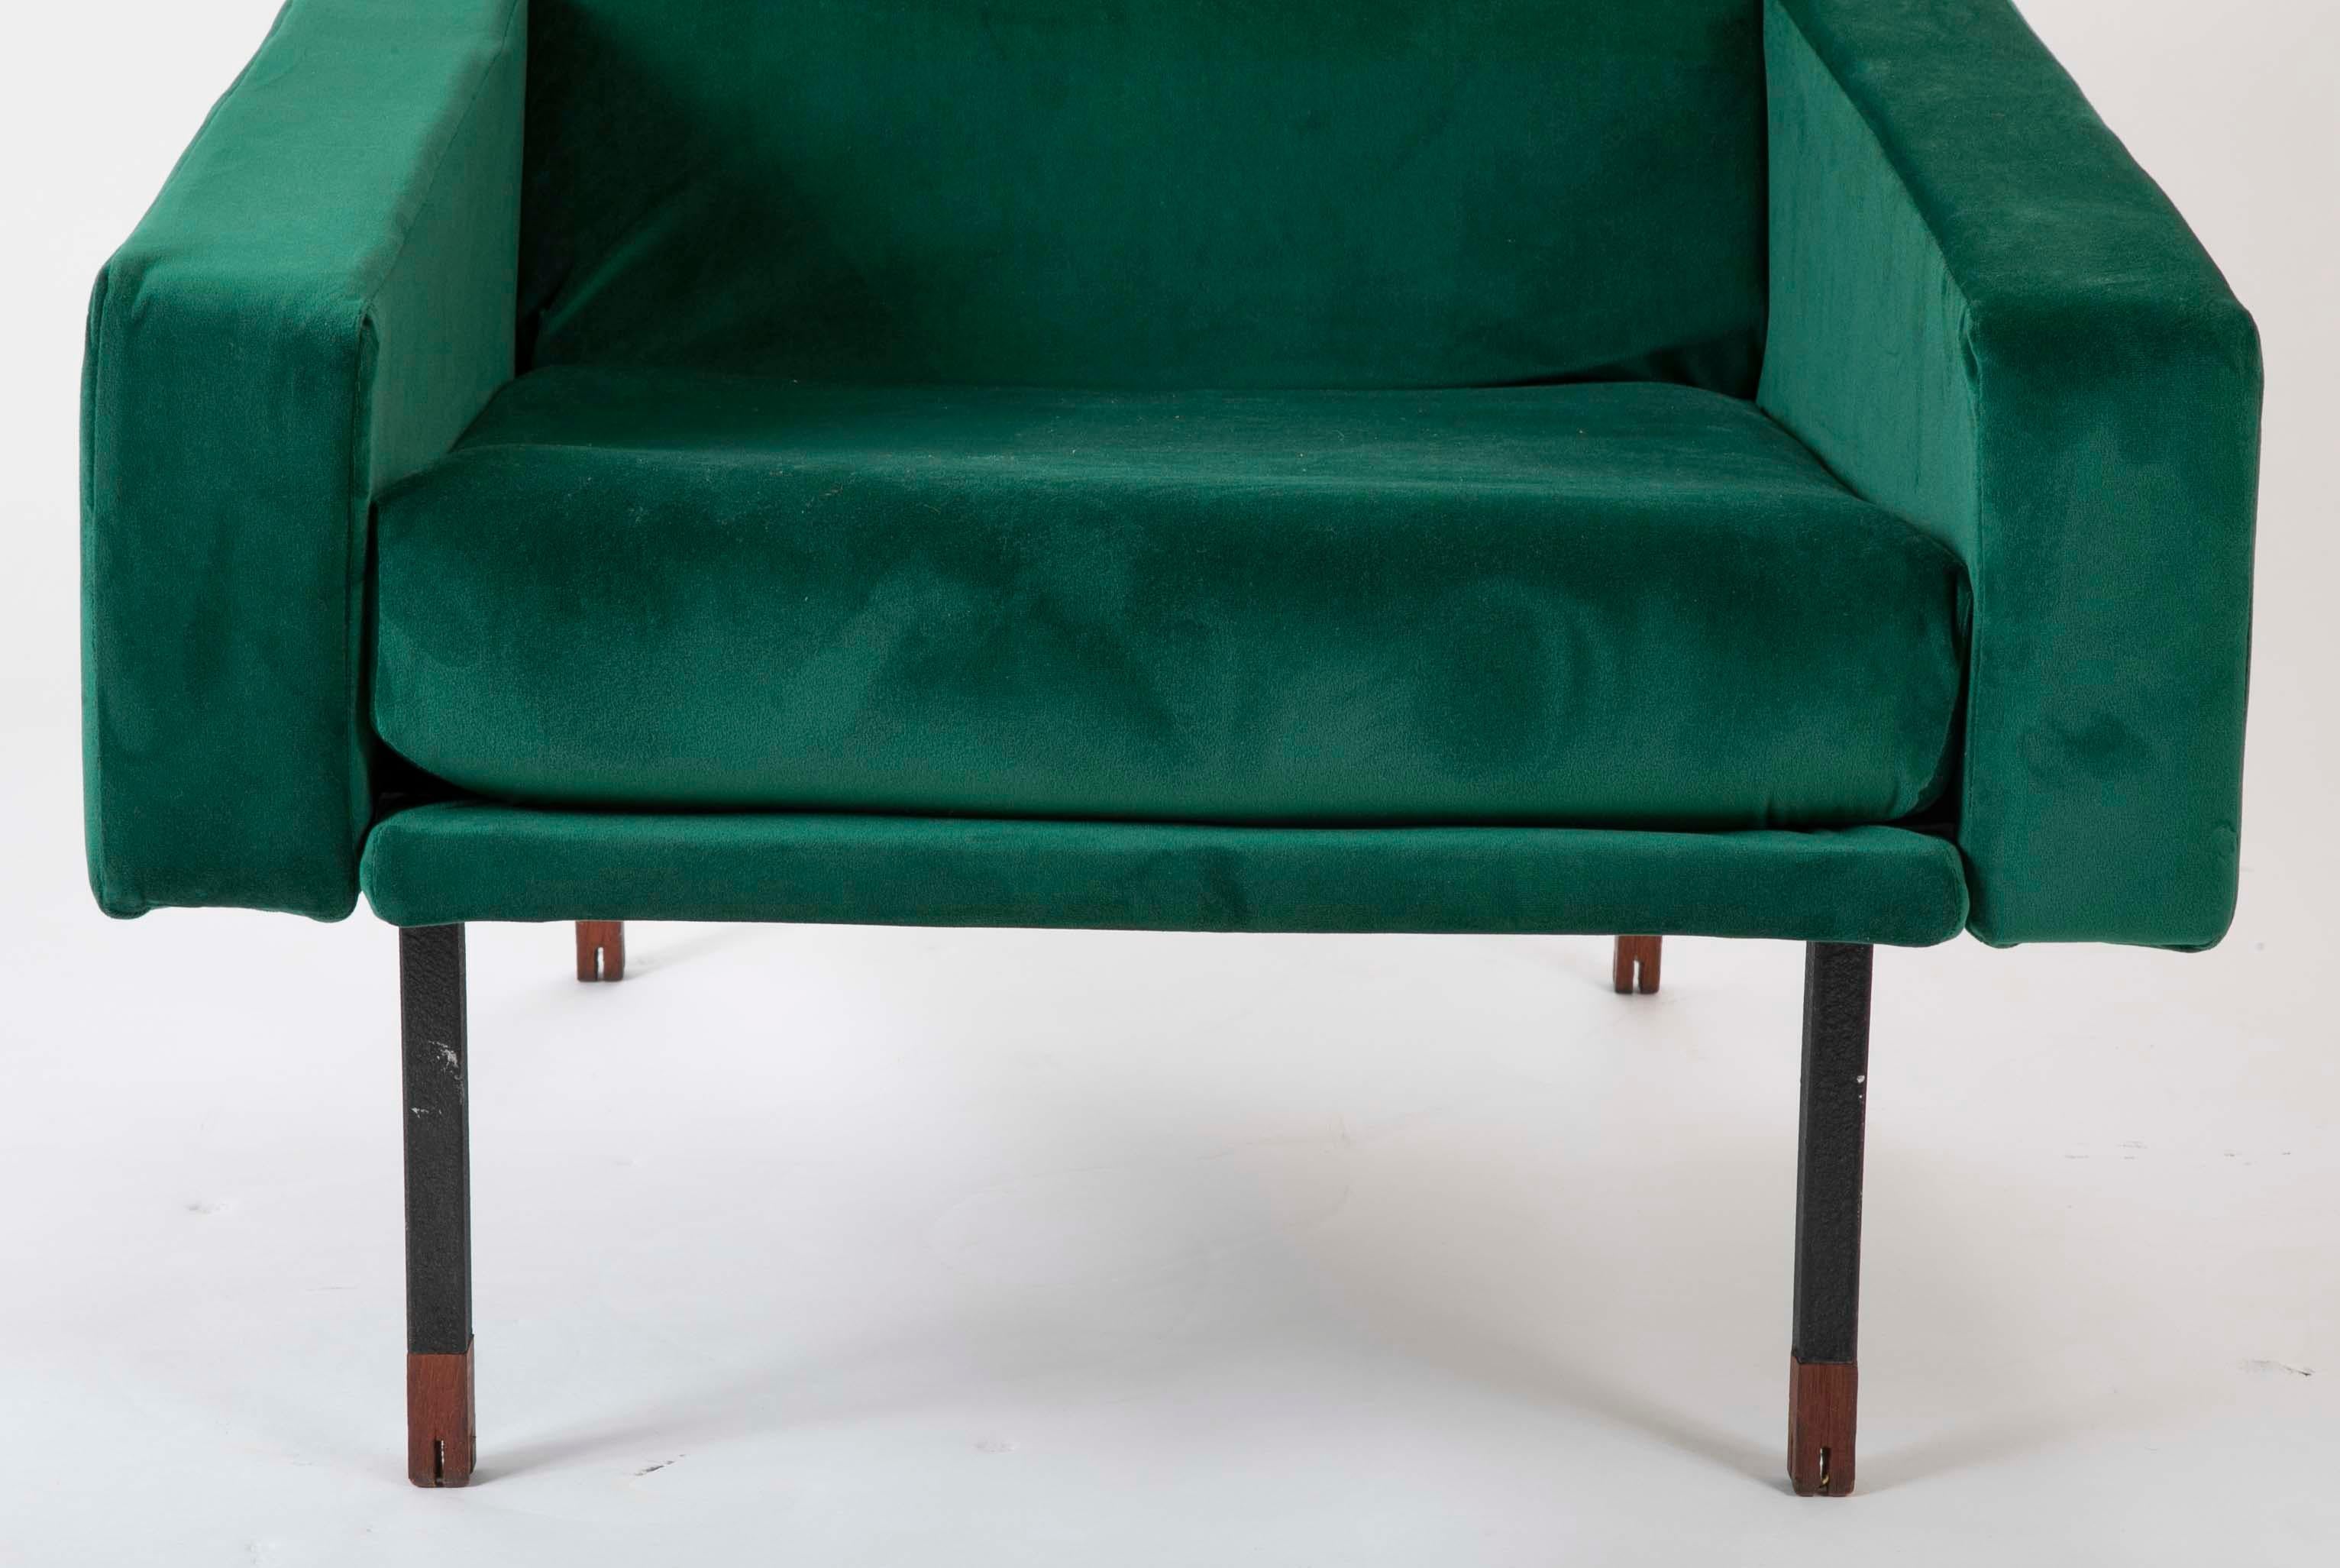 Pair of Upholstered Italian Midcentury Armchairs with Walnut Tipped Legs In Good Condition For Sale In Stamford, CT